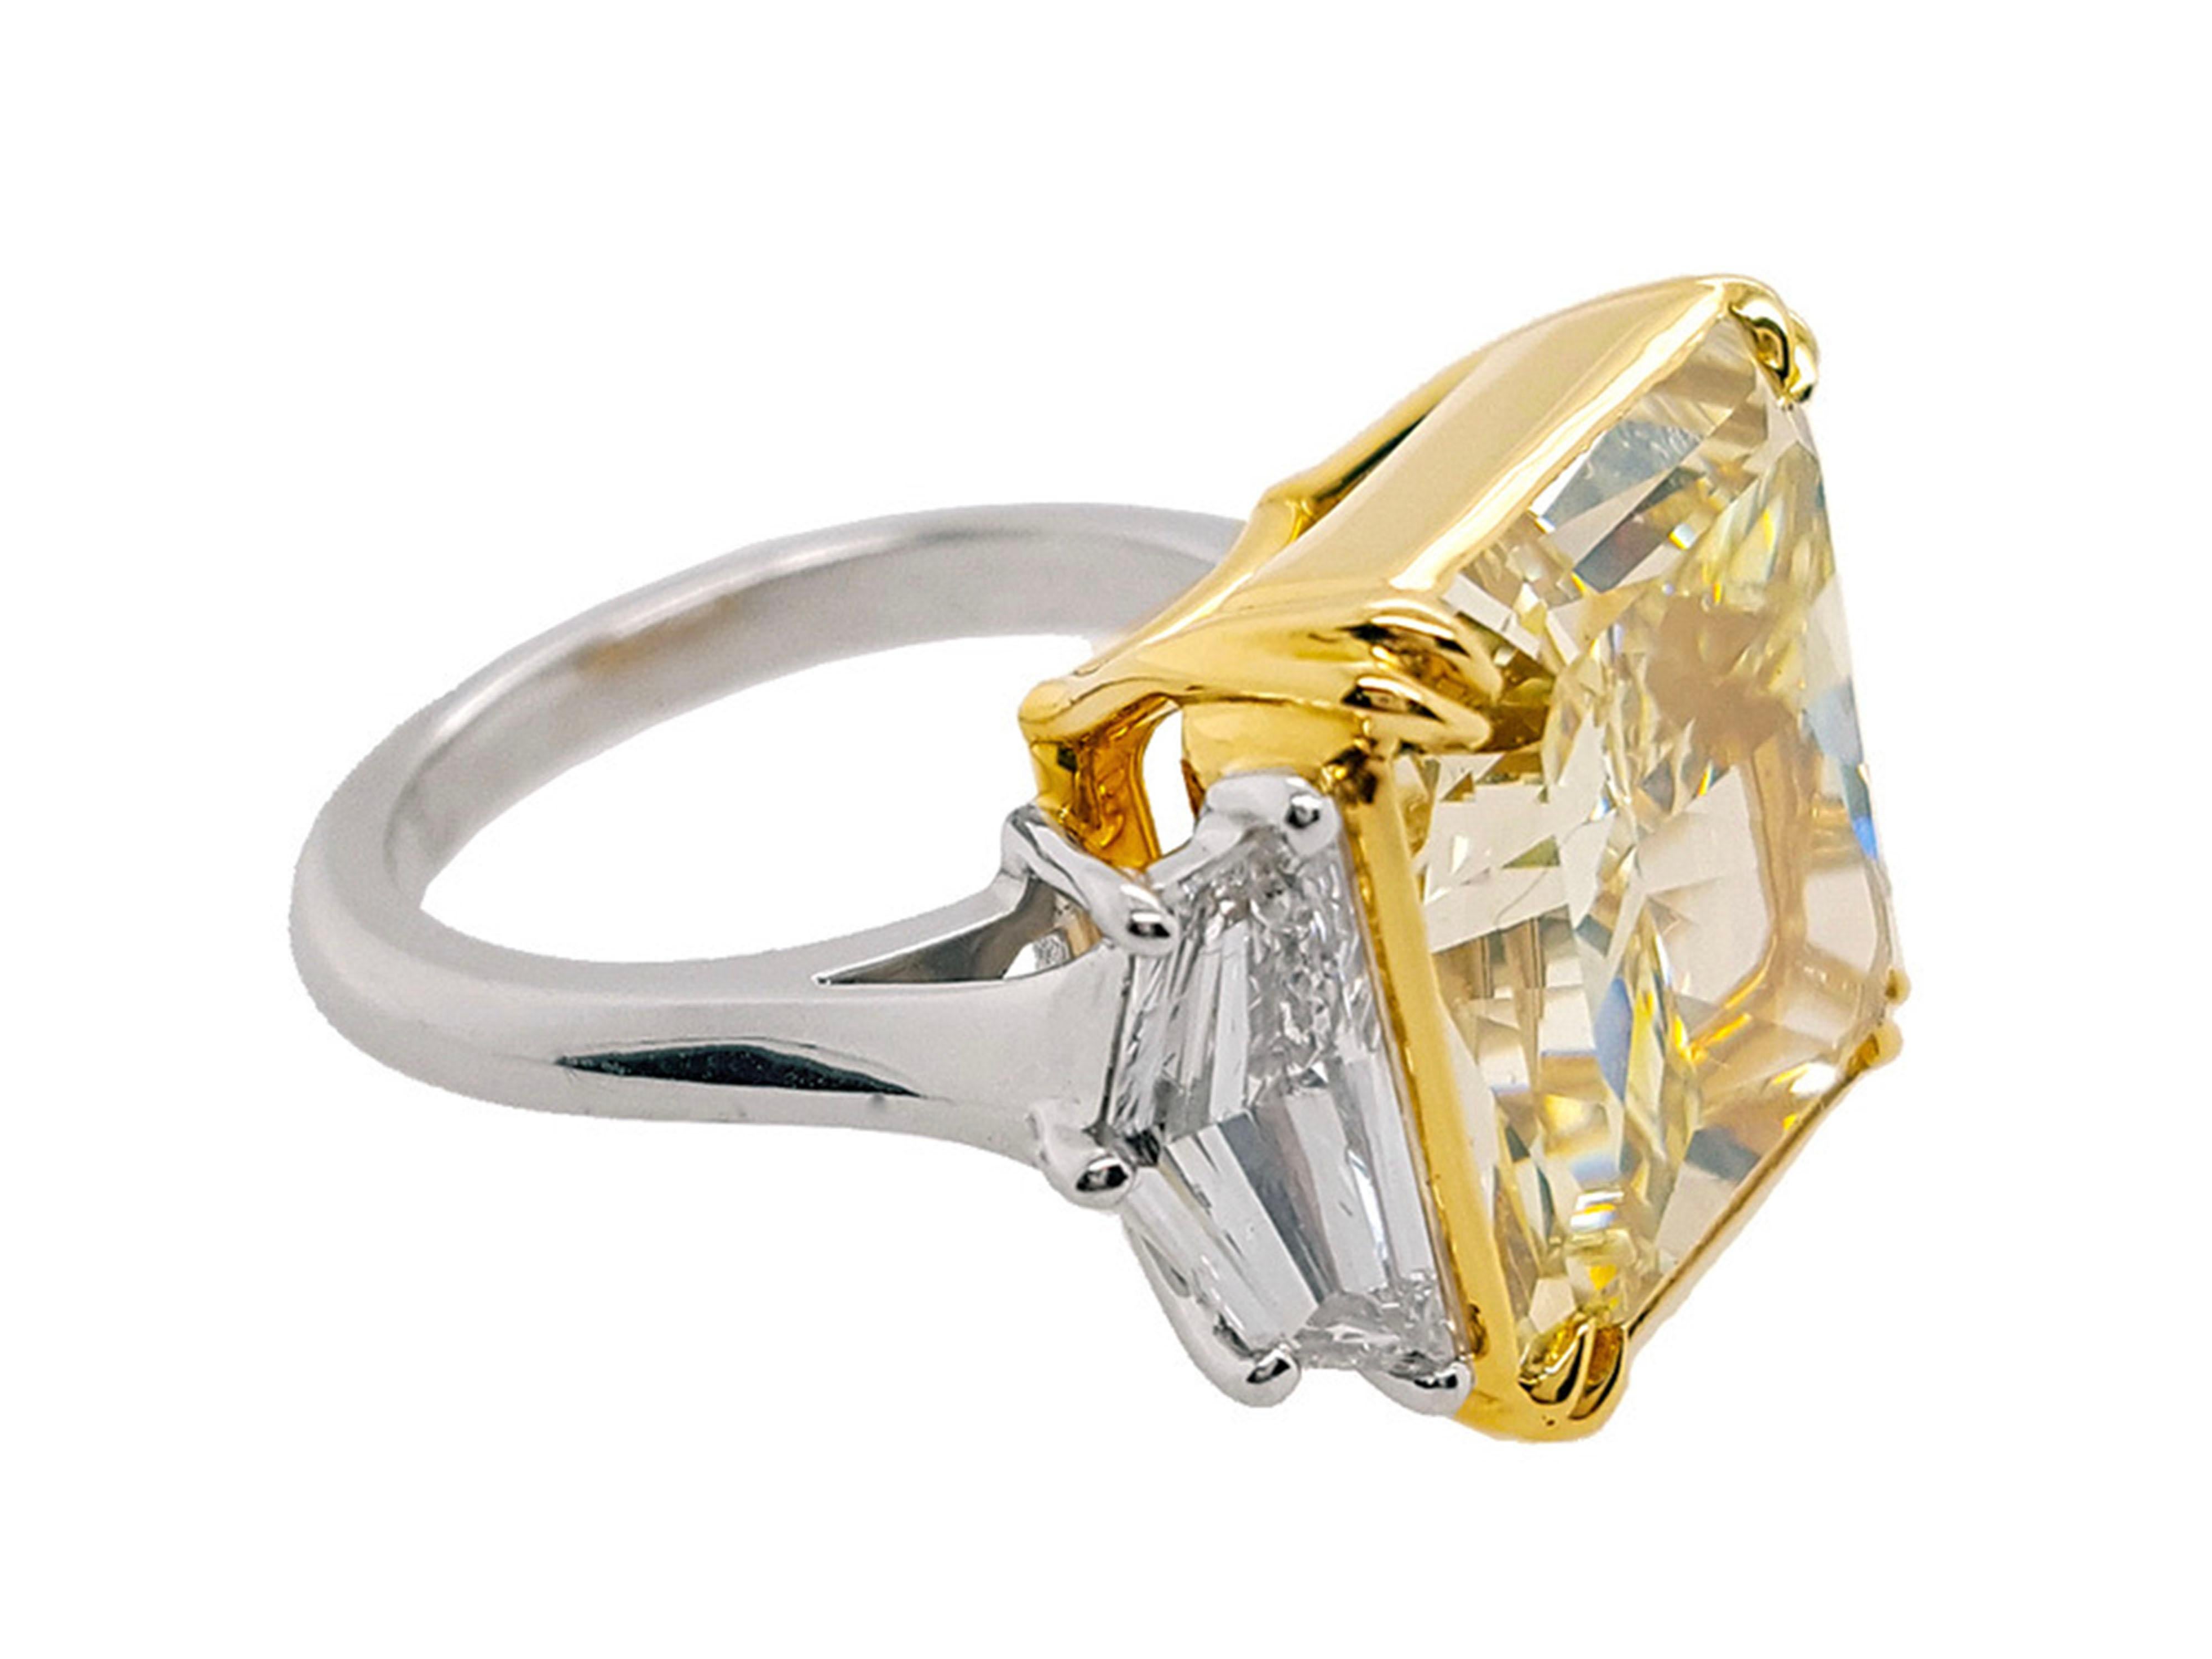 Absolutely stunning engagement ring style showcasing a Fancy Light Yellow 14 carat square cut diamond certified by GIA as VS1 clarity. The large size of the center stone turns this ring into a real showstopper. Flanked by two Cadillac cut diamonds